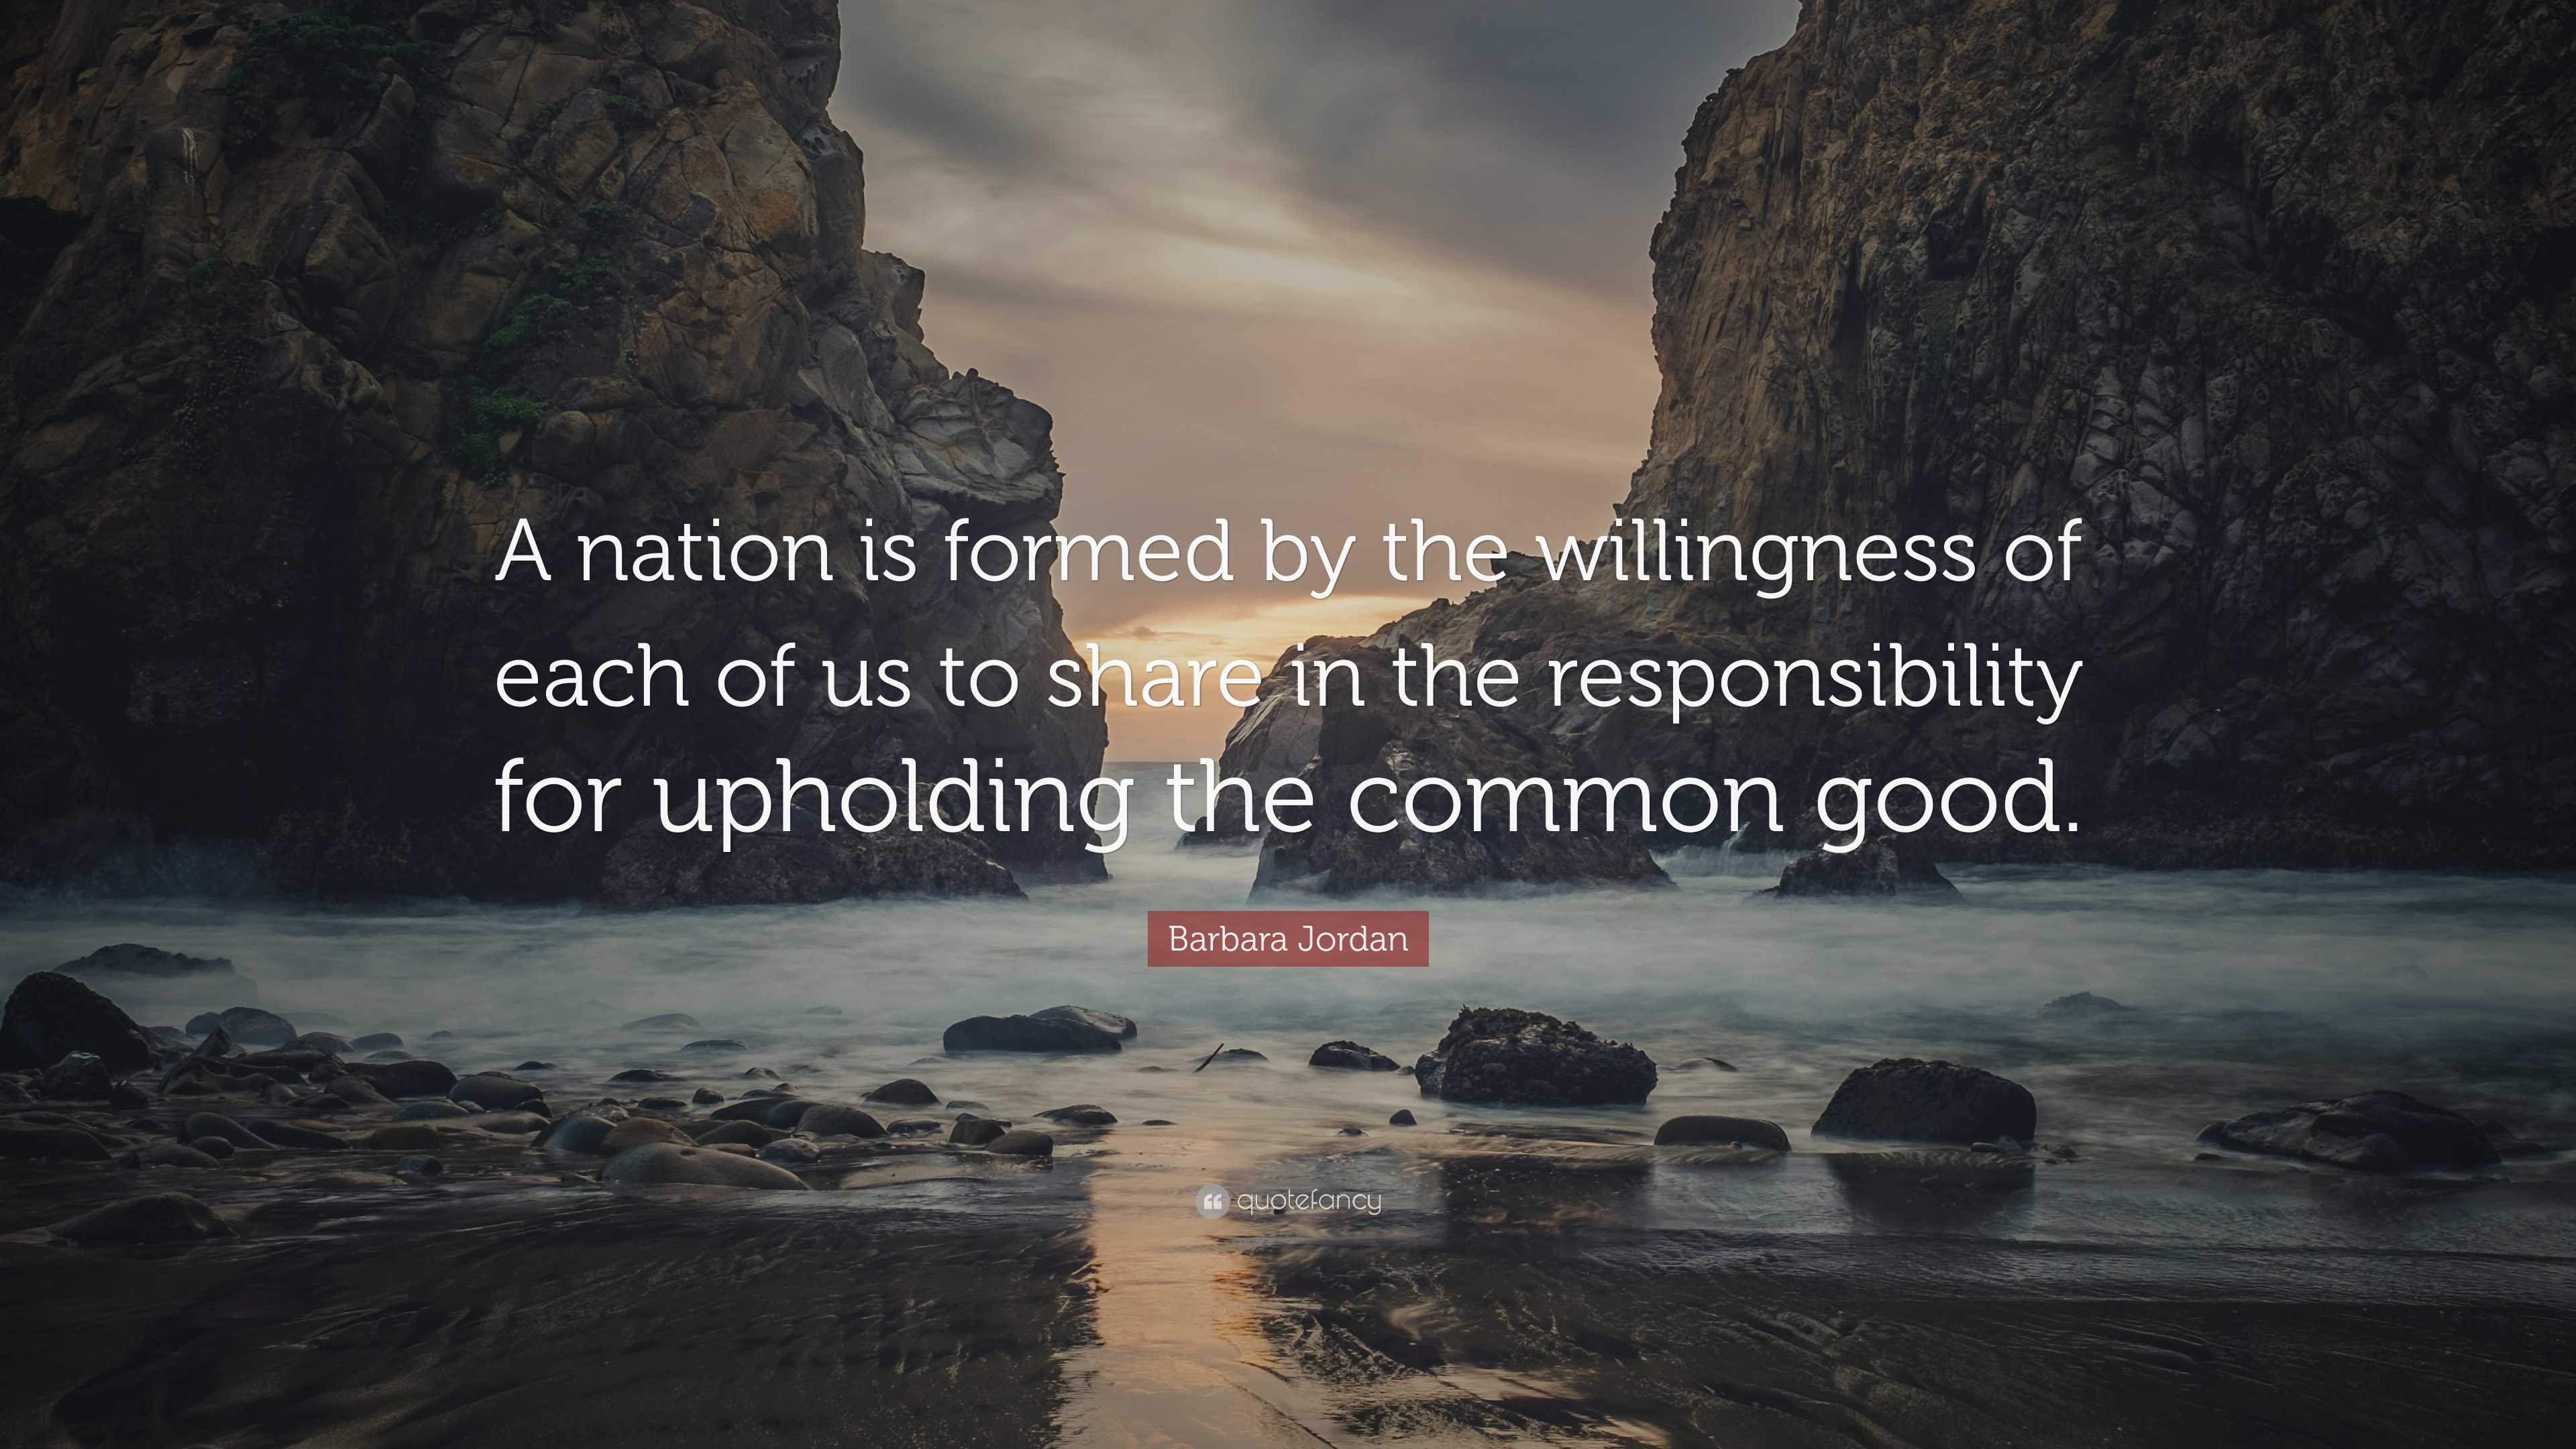 Barbara Jordan Quote: “A nation is formed by the willingness of each of ...